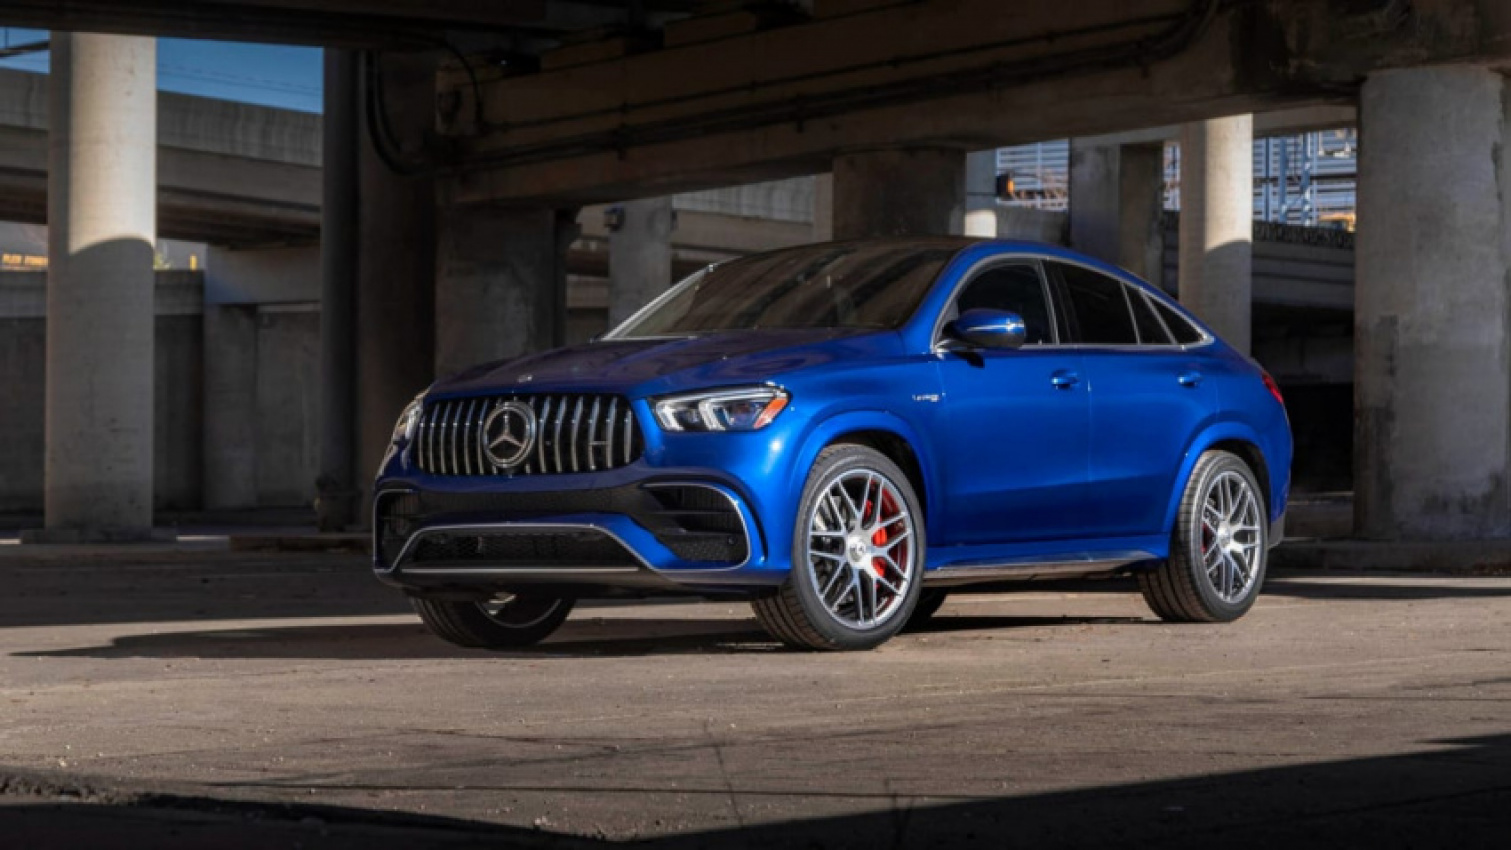 autos, cars, mercedes-benz, mg, commerce, mercedes, omaze, this mercedes-amg gle 63 s has over 600 horsepower, and you can win it